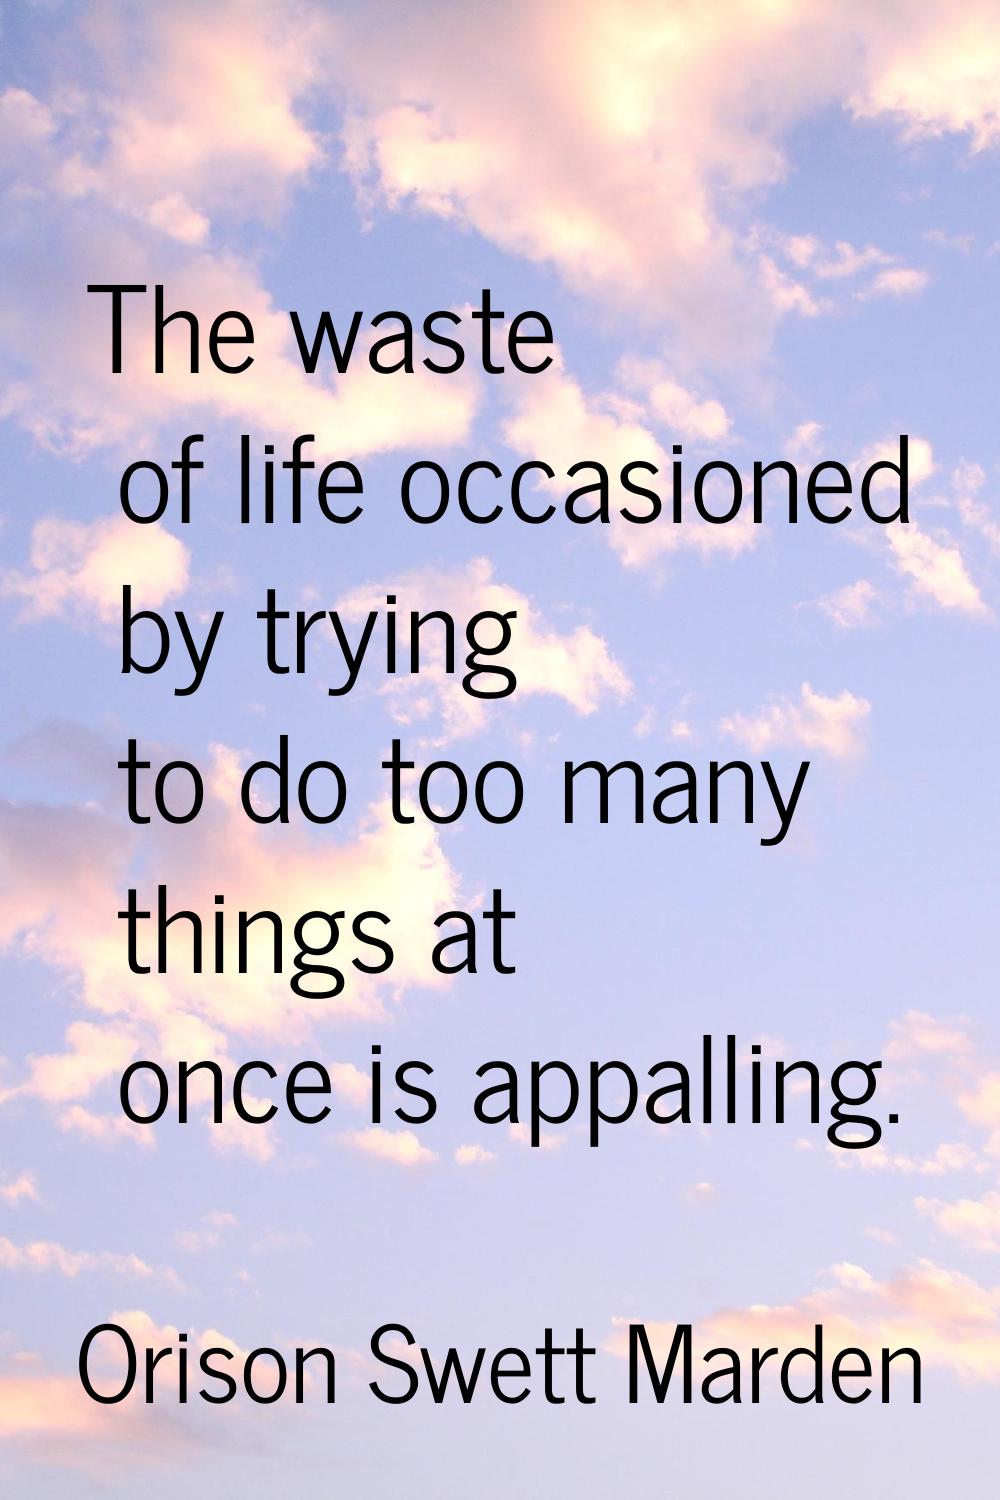 The waste of life occasioned by trying to do too many things at once is appalling.